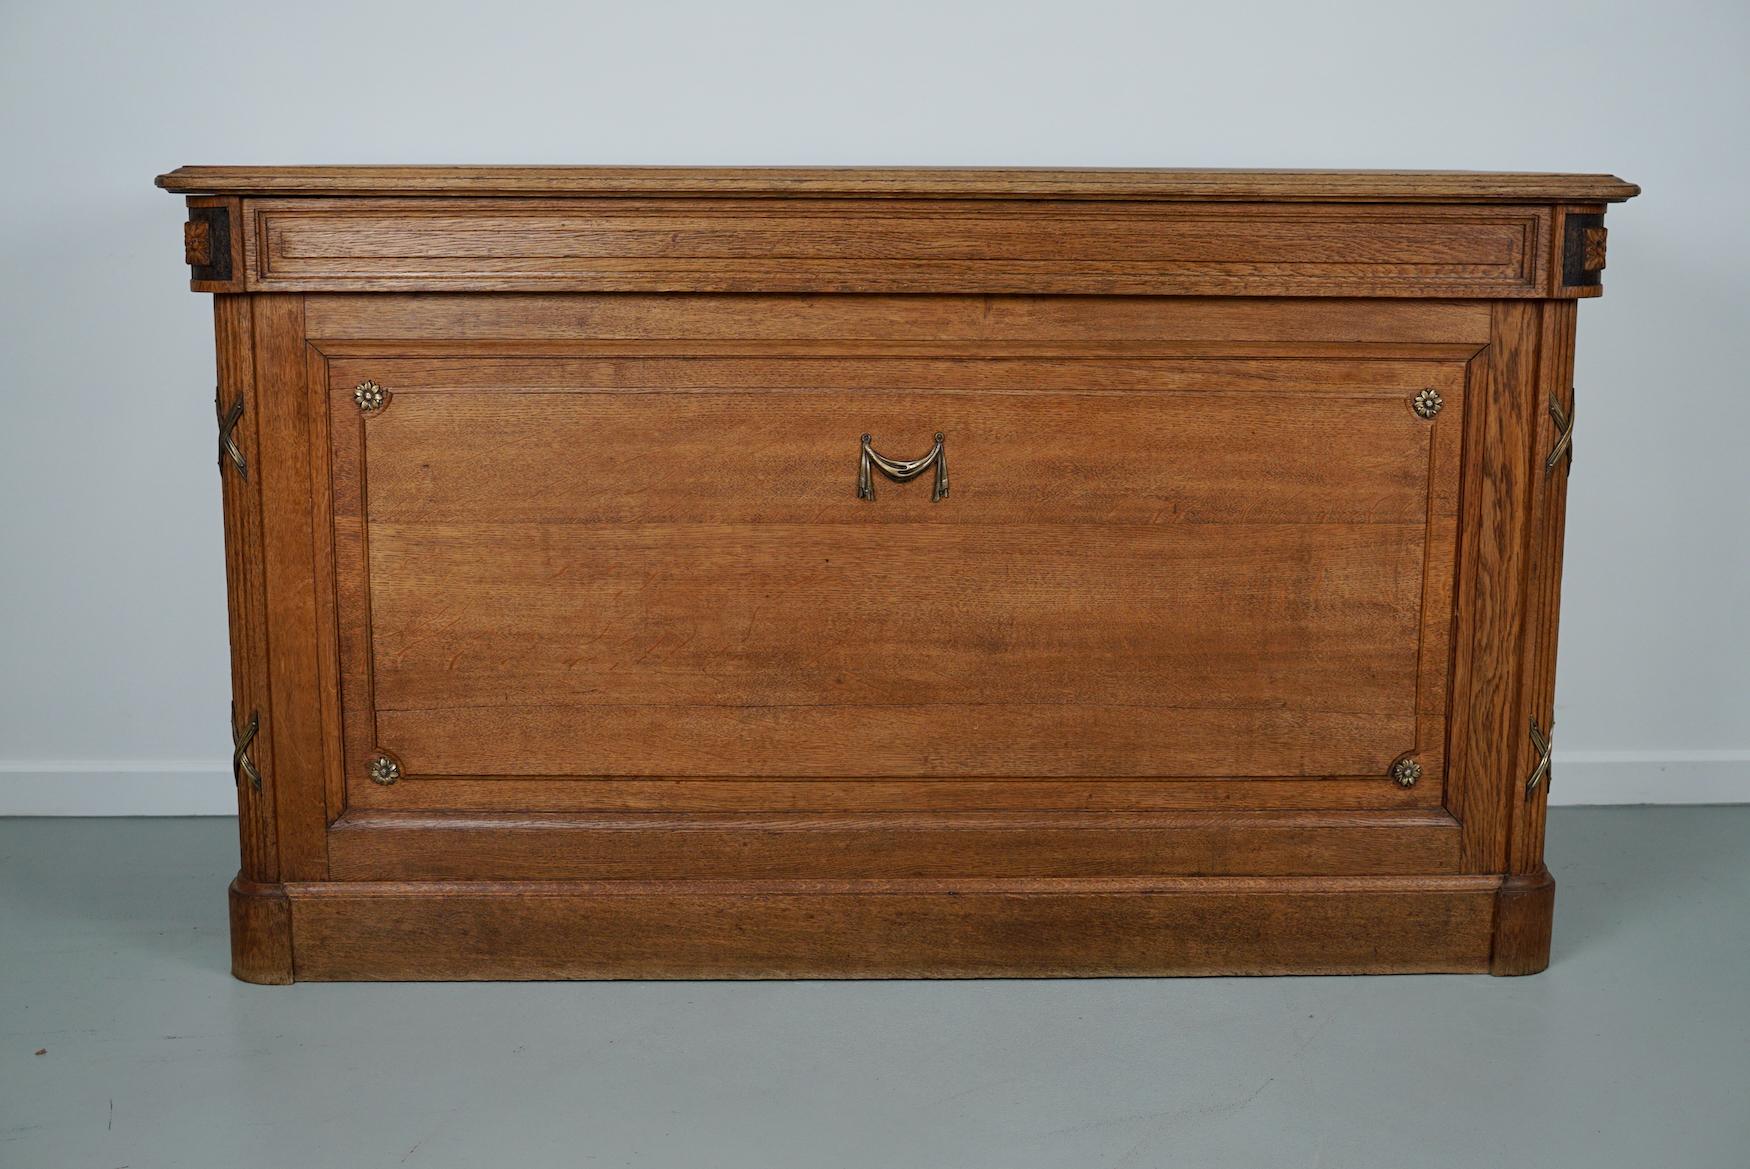 This rare shop counter was made in the Napoleon 3 period in France from gold oak. It has amazing bronze hardware and two drawers with a shelve at the back. It could be placed against a wall or used as a shop counter / desk. The interior dimensions